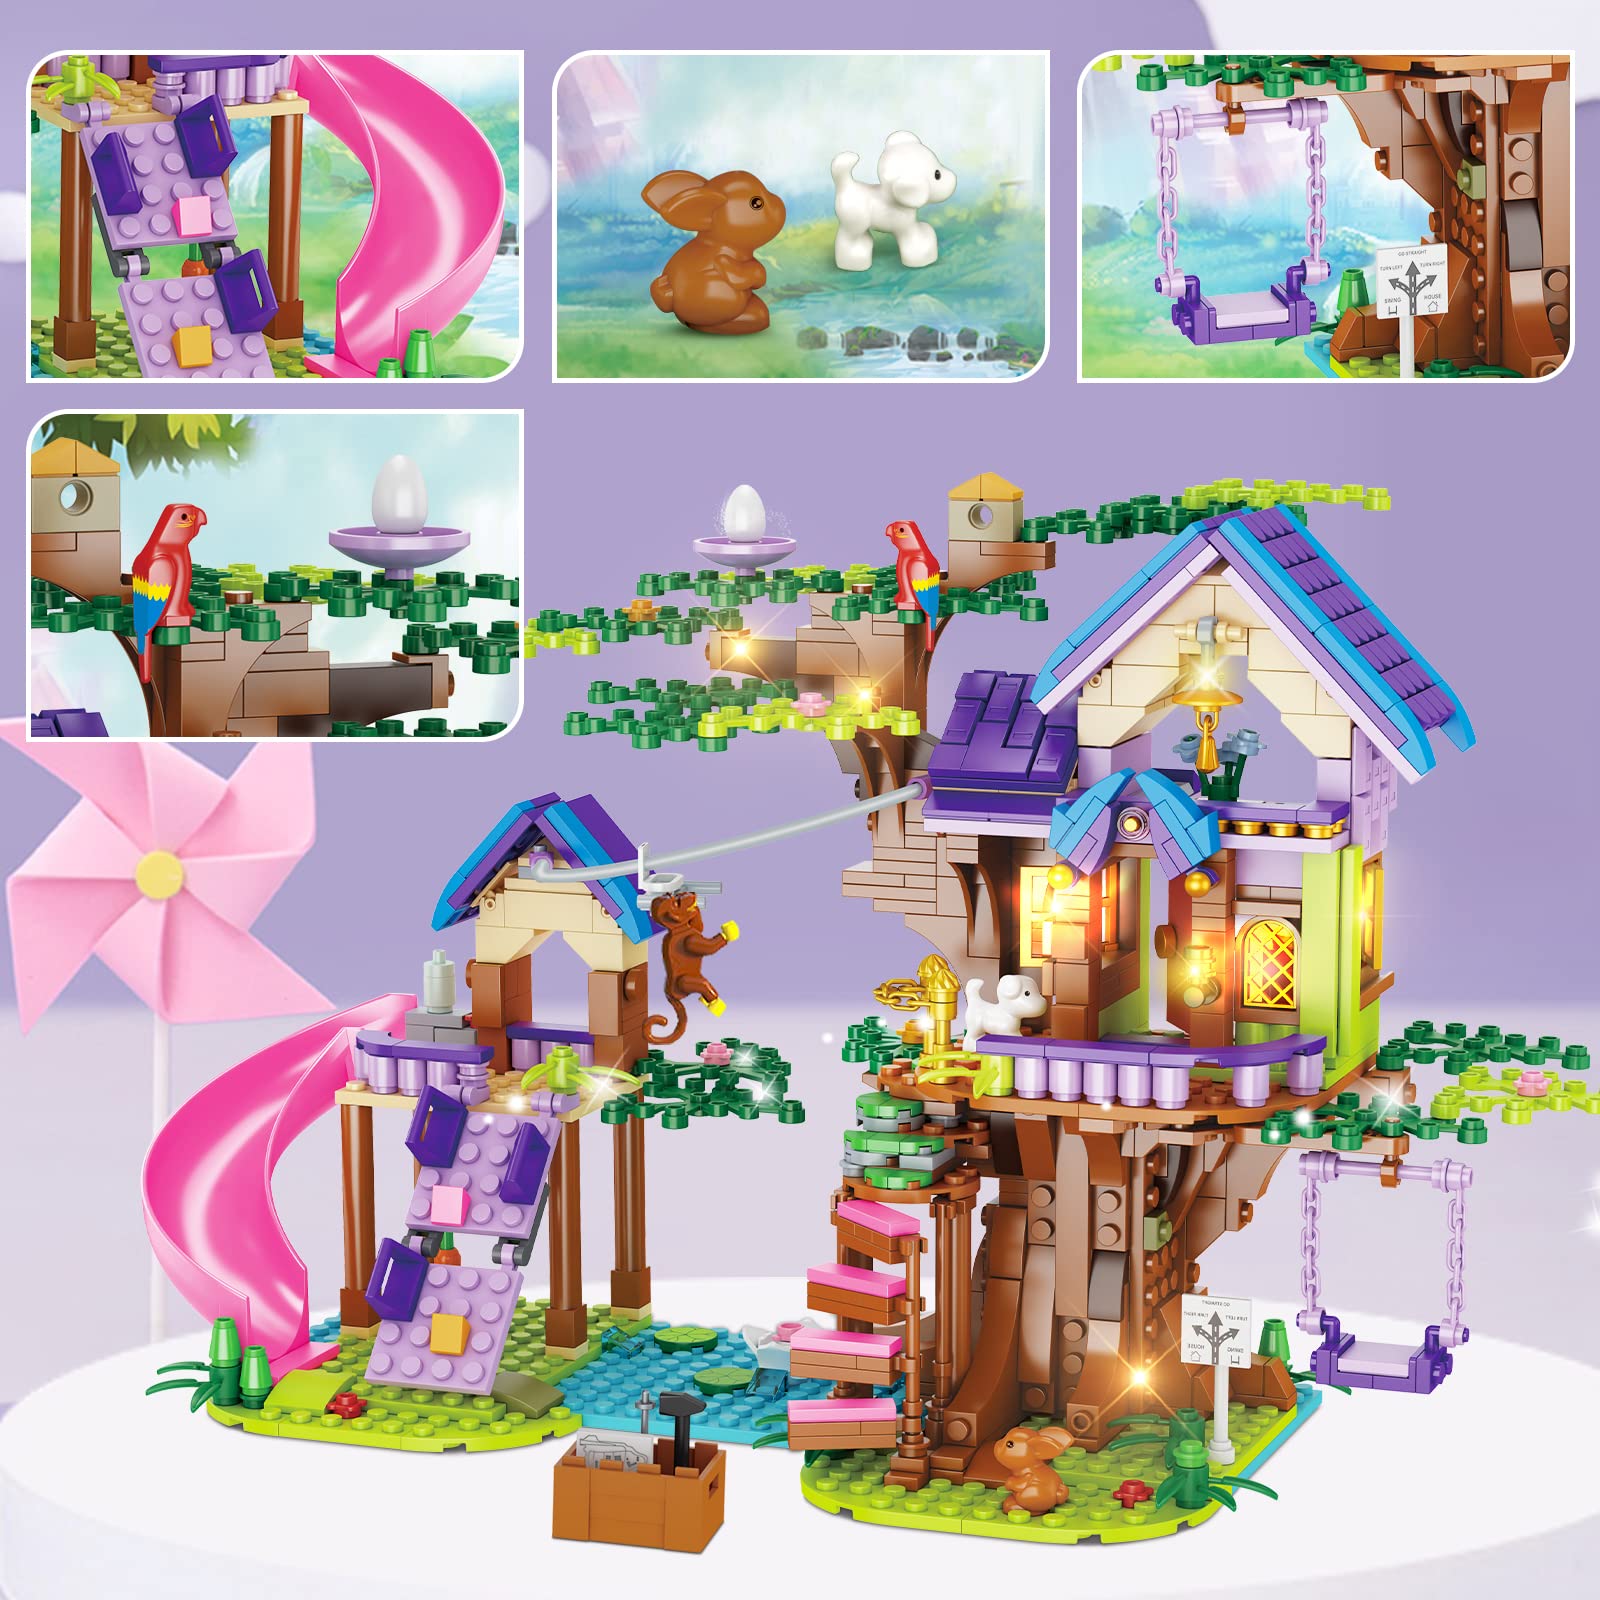 OKKIDY Tree House Building Toys for Kids, Girls Friendship Building Blocks with with LED Light, Creative Forest House Age 6 7 8 9 10 11 12+ Birthday Gift Girls Boys